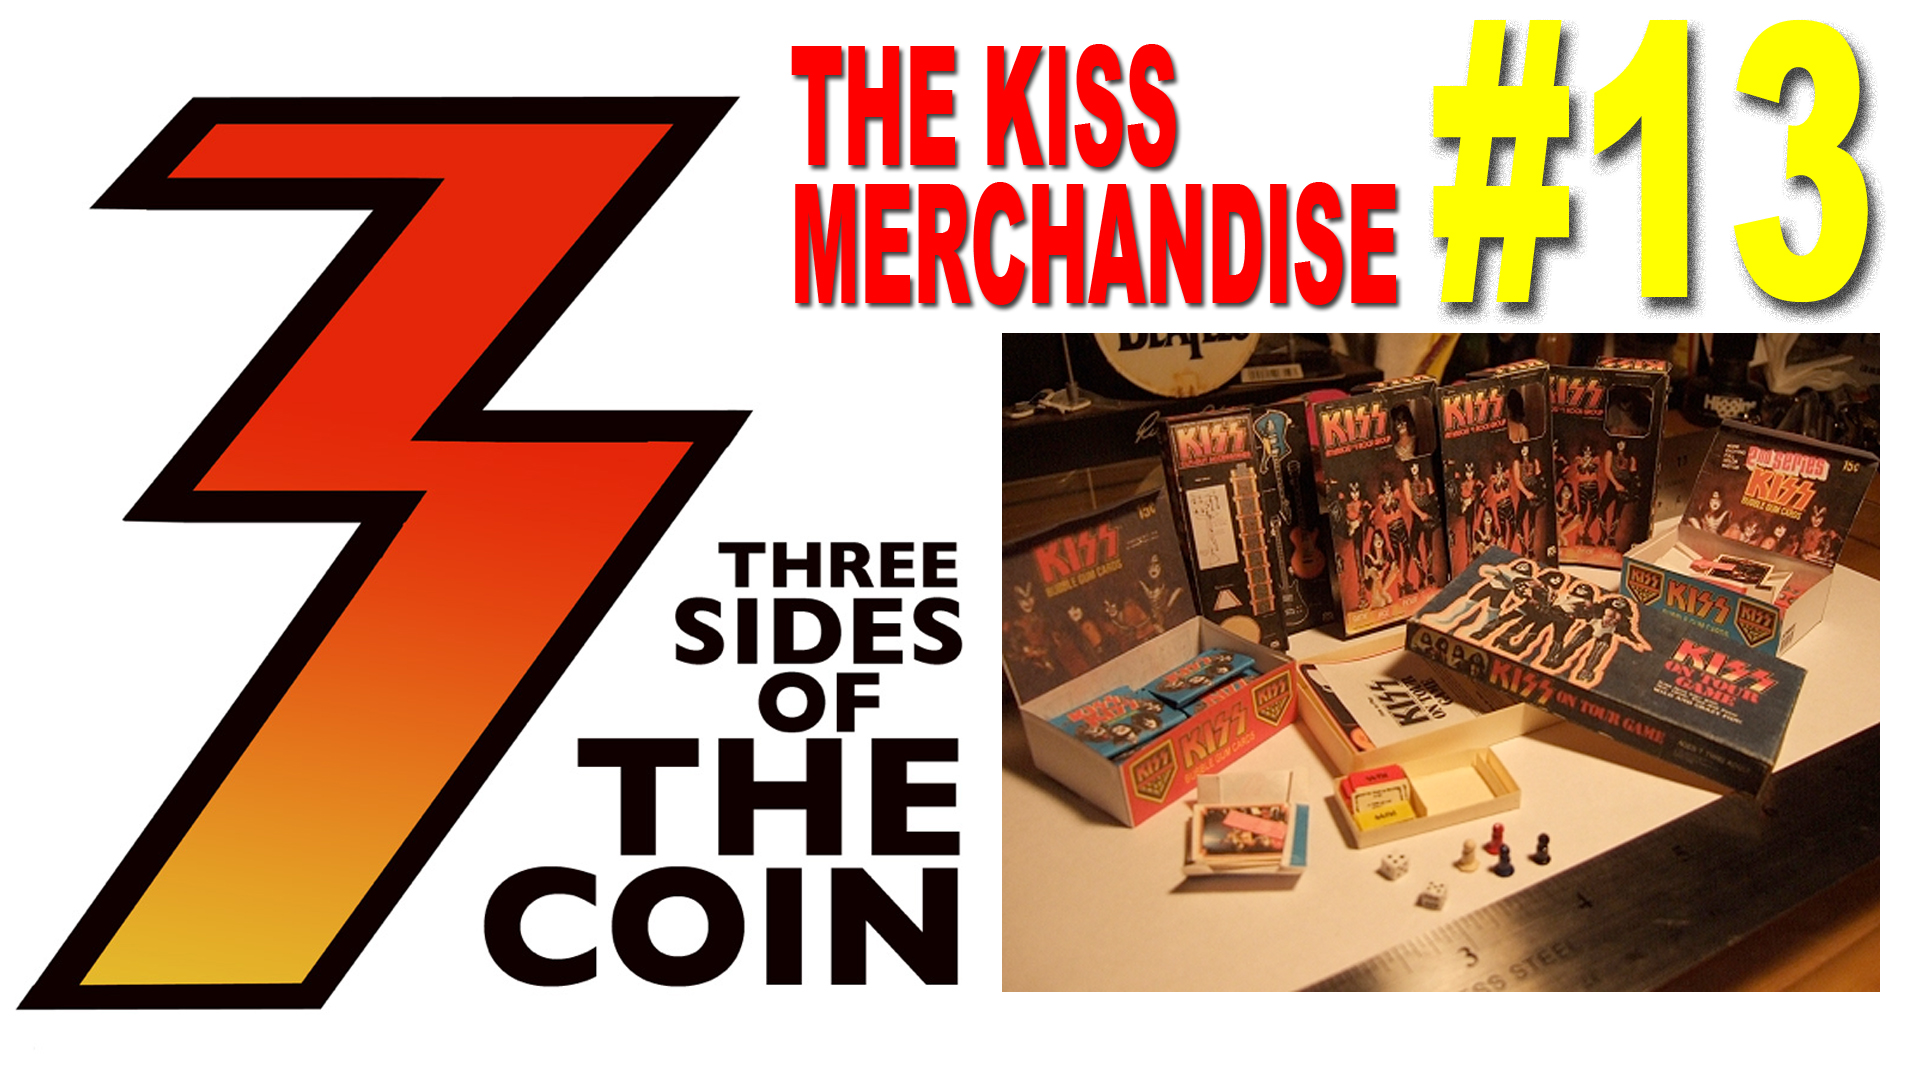 Kiss Merchandise. Ace Frehley the other Side of the Coin Ace. 2 Sides of Coin. Three sides